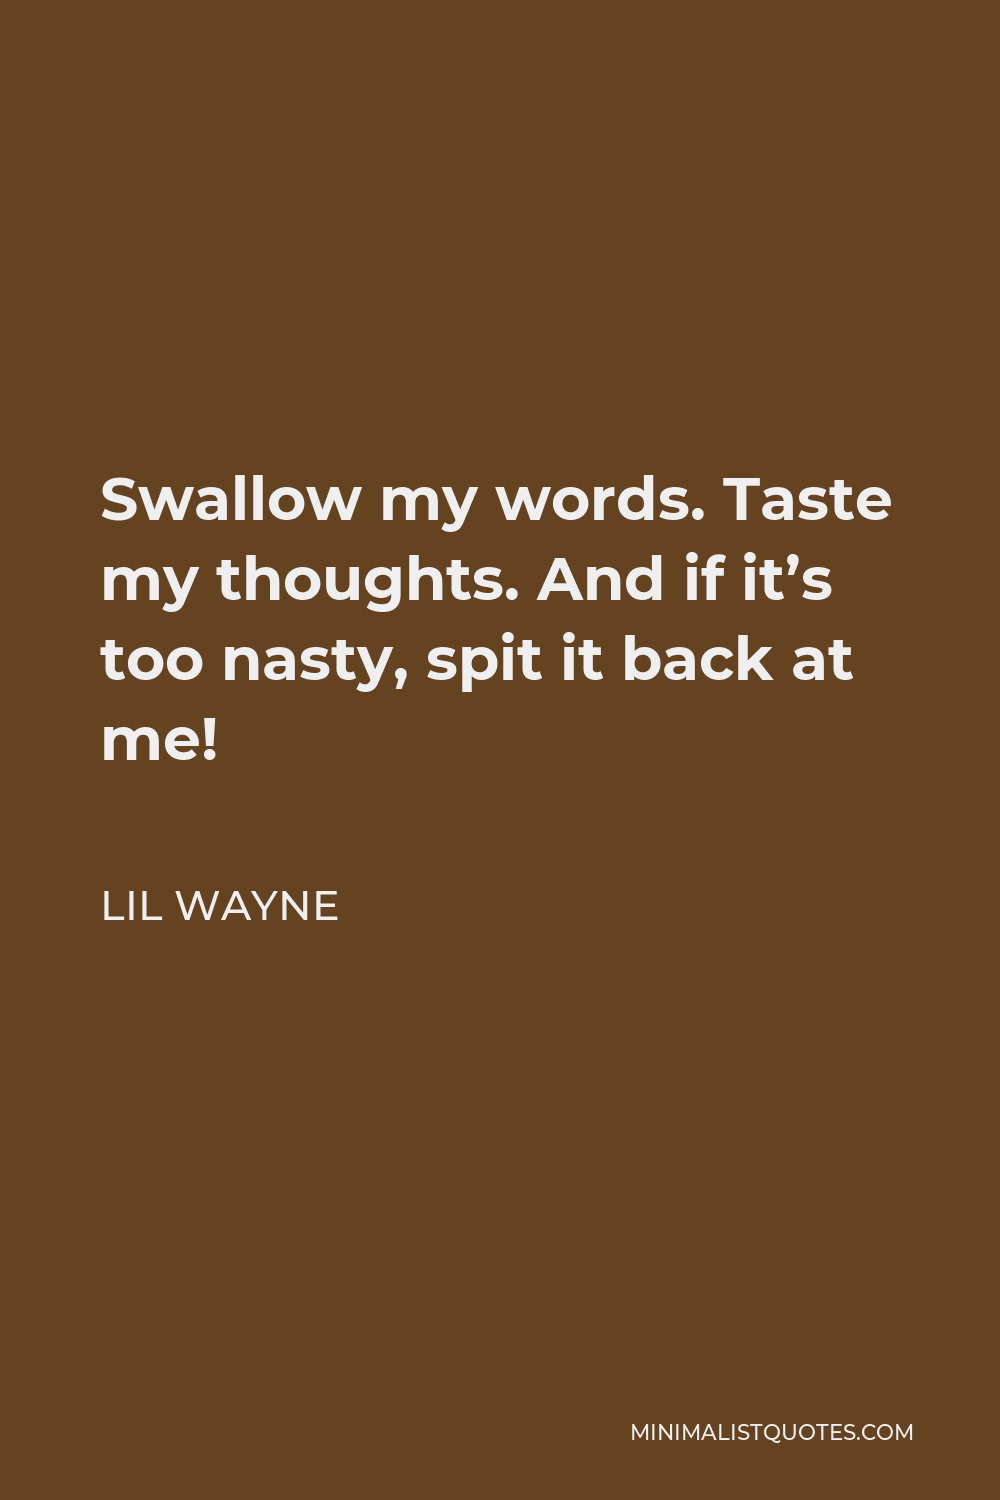 Lil Wayne Quote - Swallow my words. Taste my thoughts. And if it’s too nasty, spit it back at me!